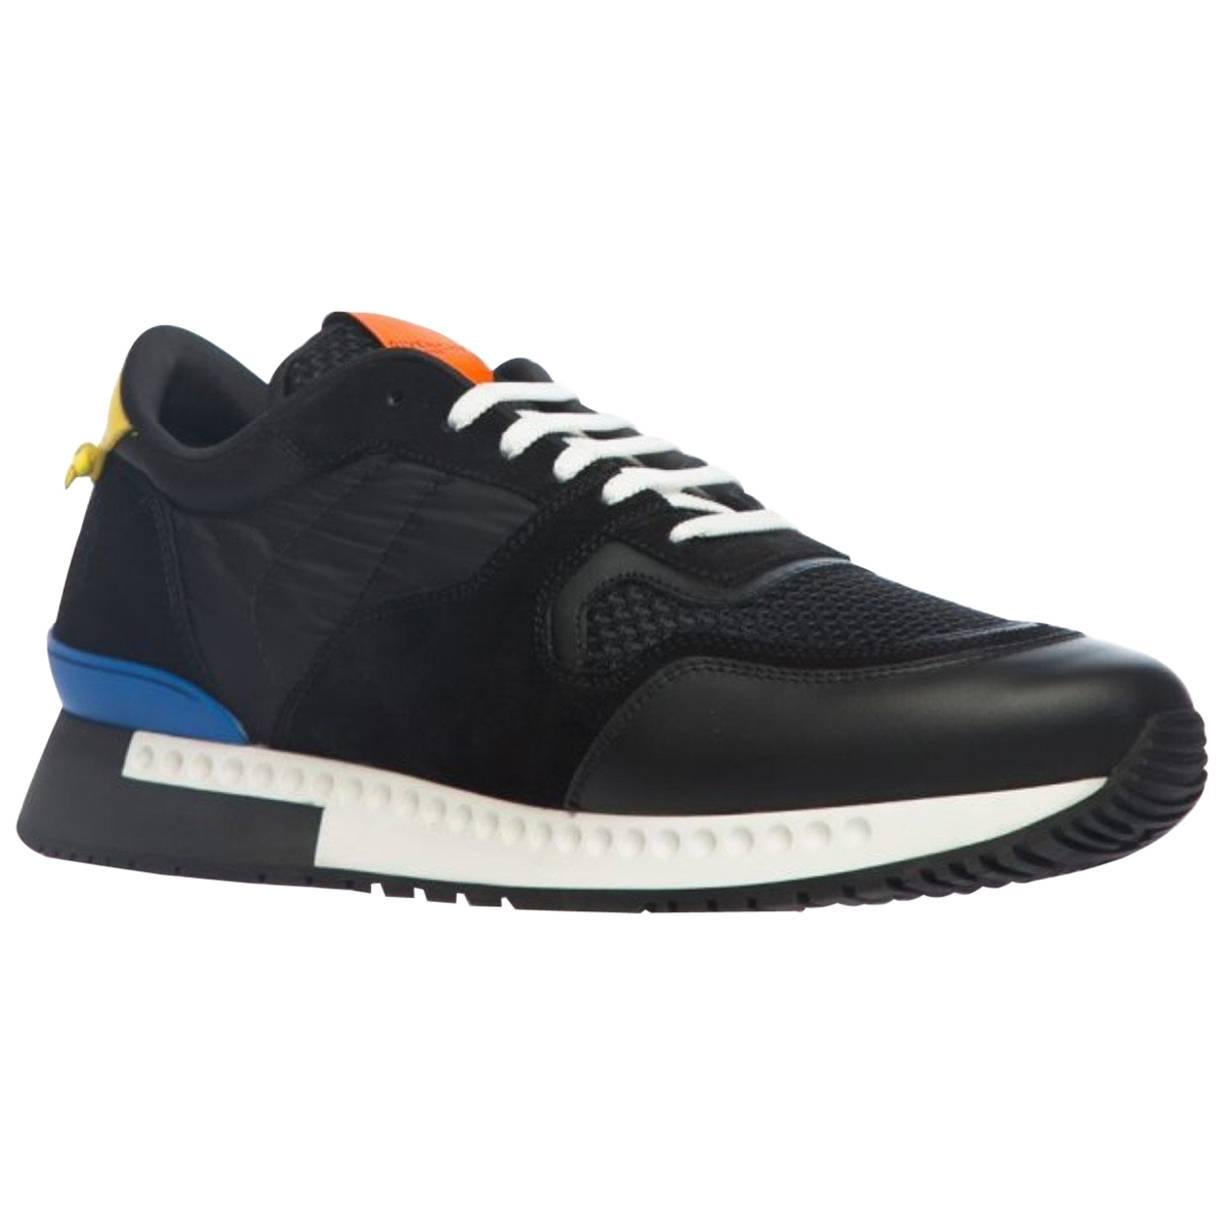 Givenchy Paneled Lace-Up Sneakers (Size - 41) For Sale